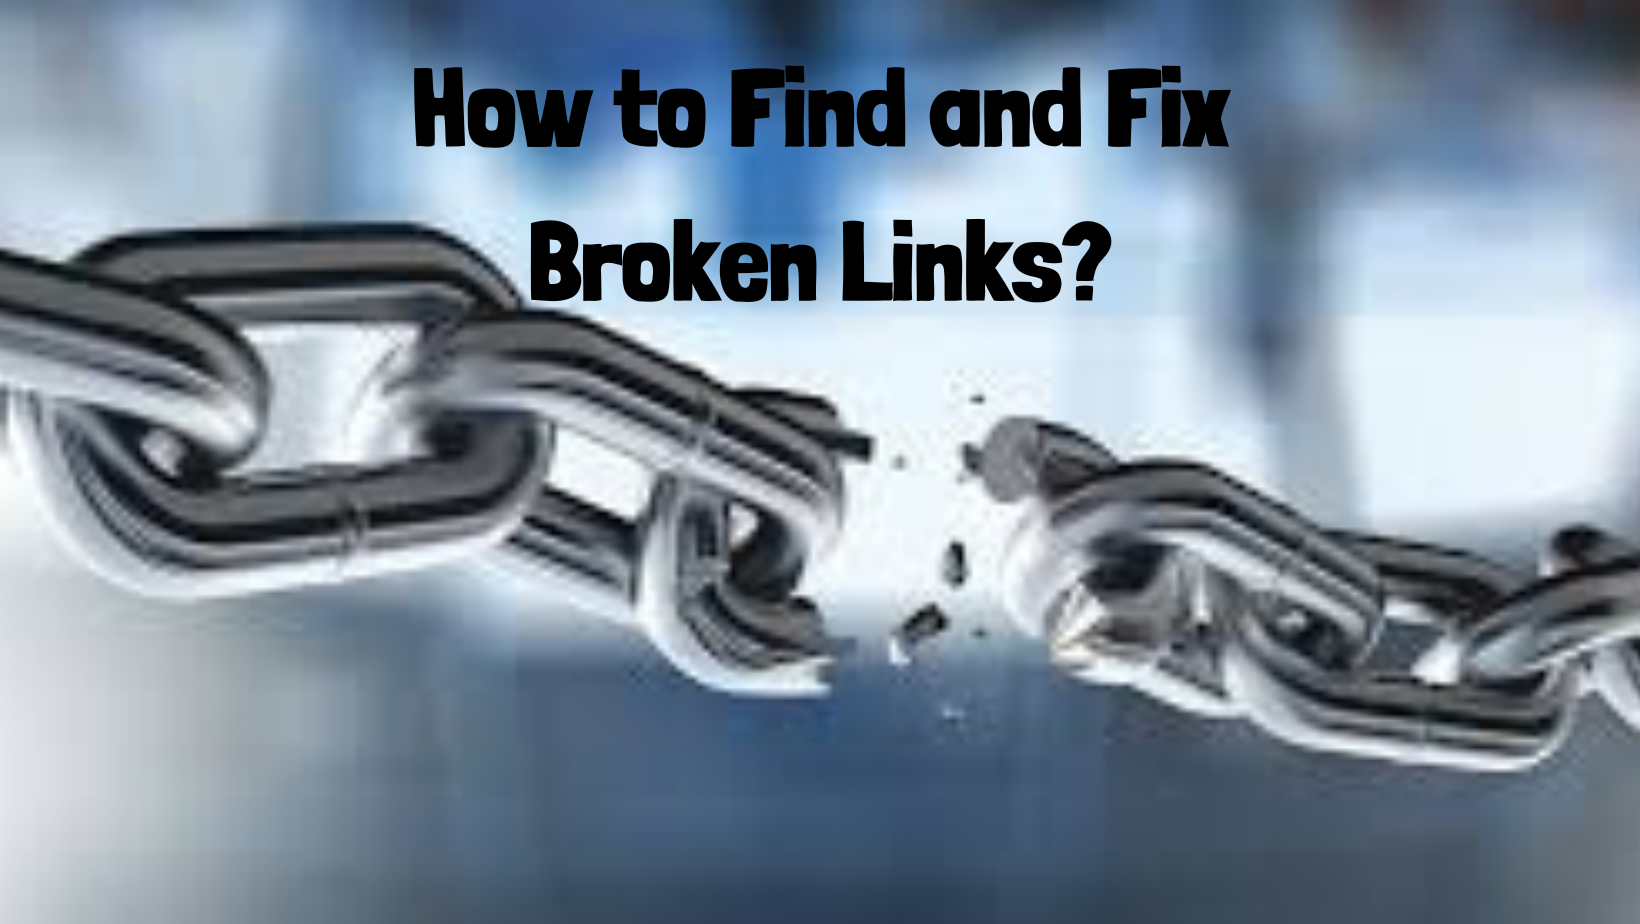 How to Find and Fix Broken Links